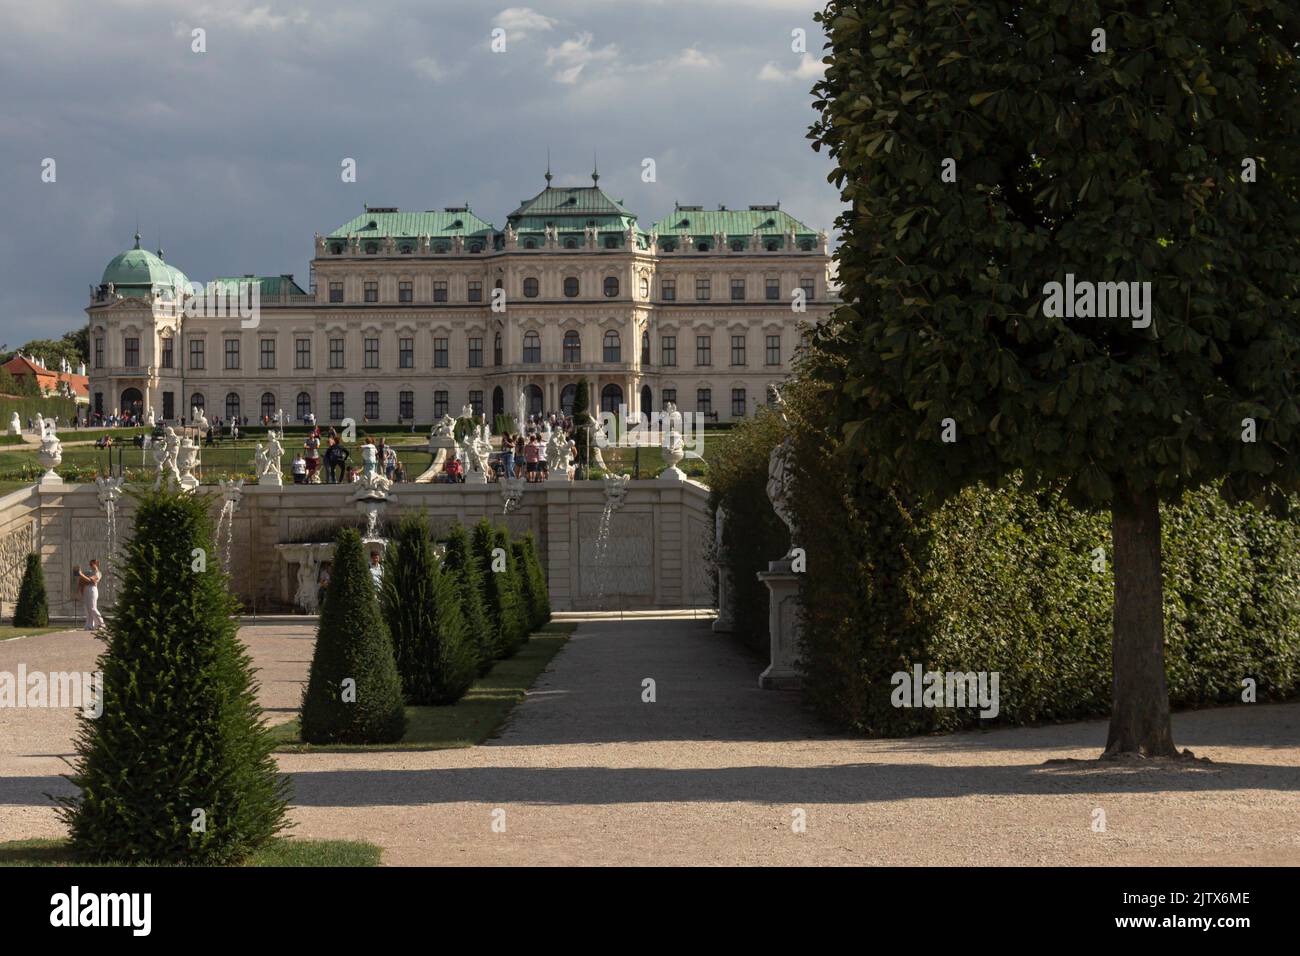 VIENNA, AUSTRIA - August 14, 2019: Belvedere Palace in Vienna, Austria. The palace were built in the 18th century as a summer residence by Prince Stock Photo